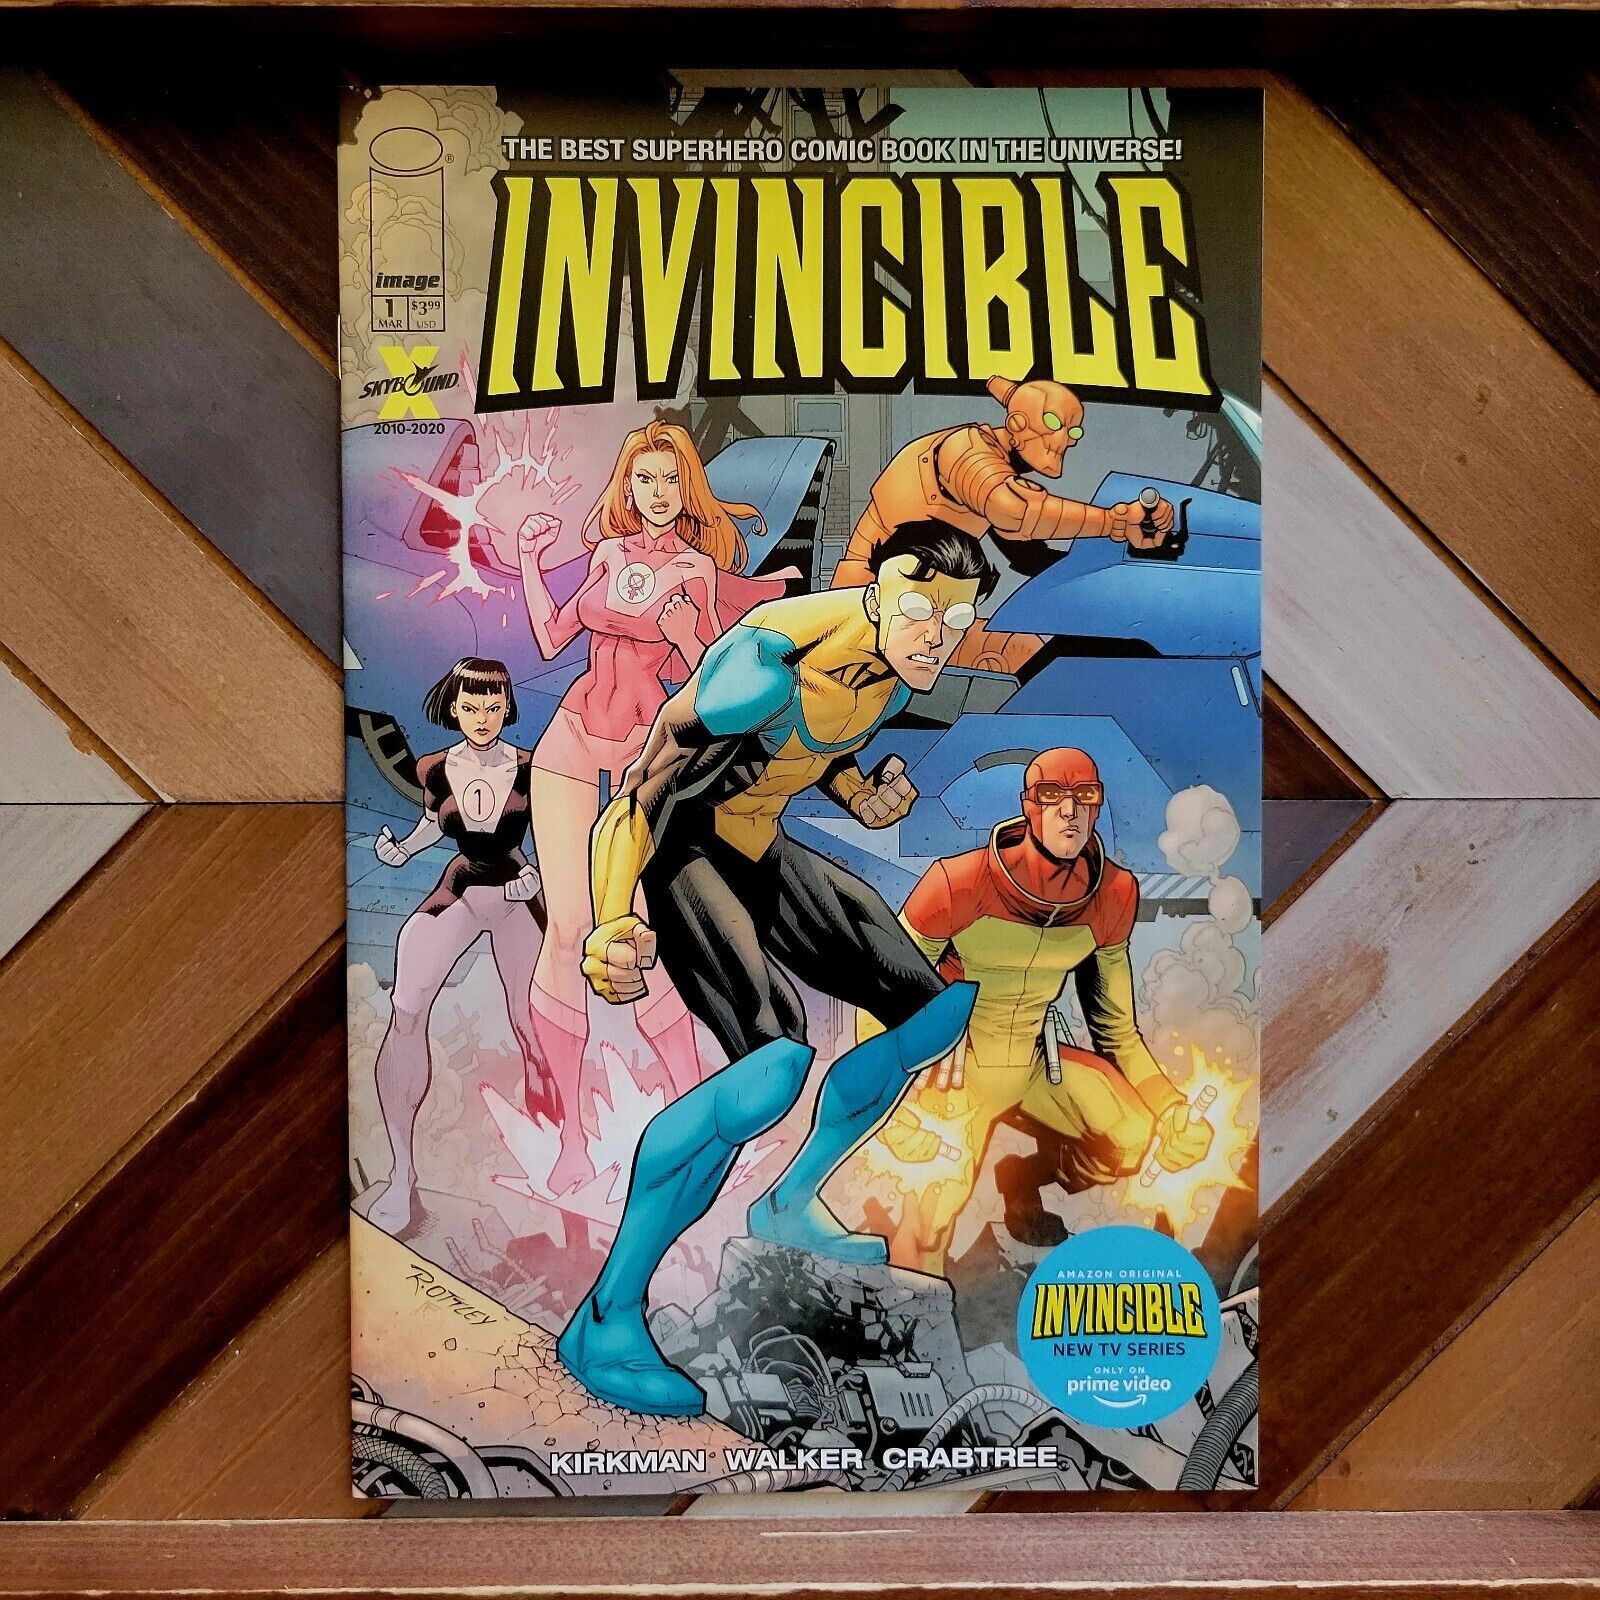 Invincible Compendium One Is $30 in a Prime Day Lightning Deal - IGN